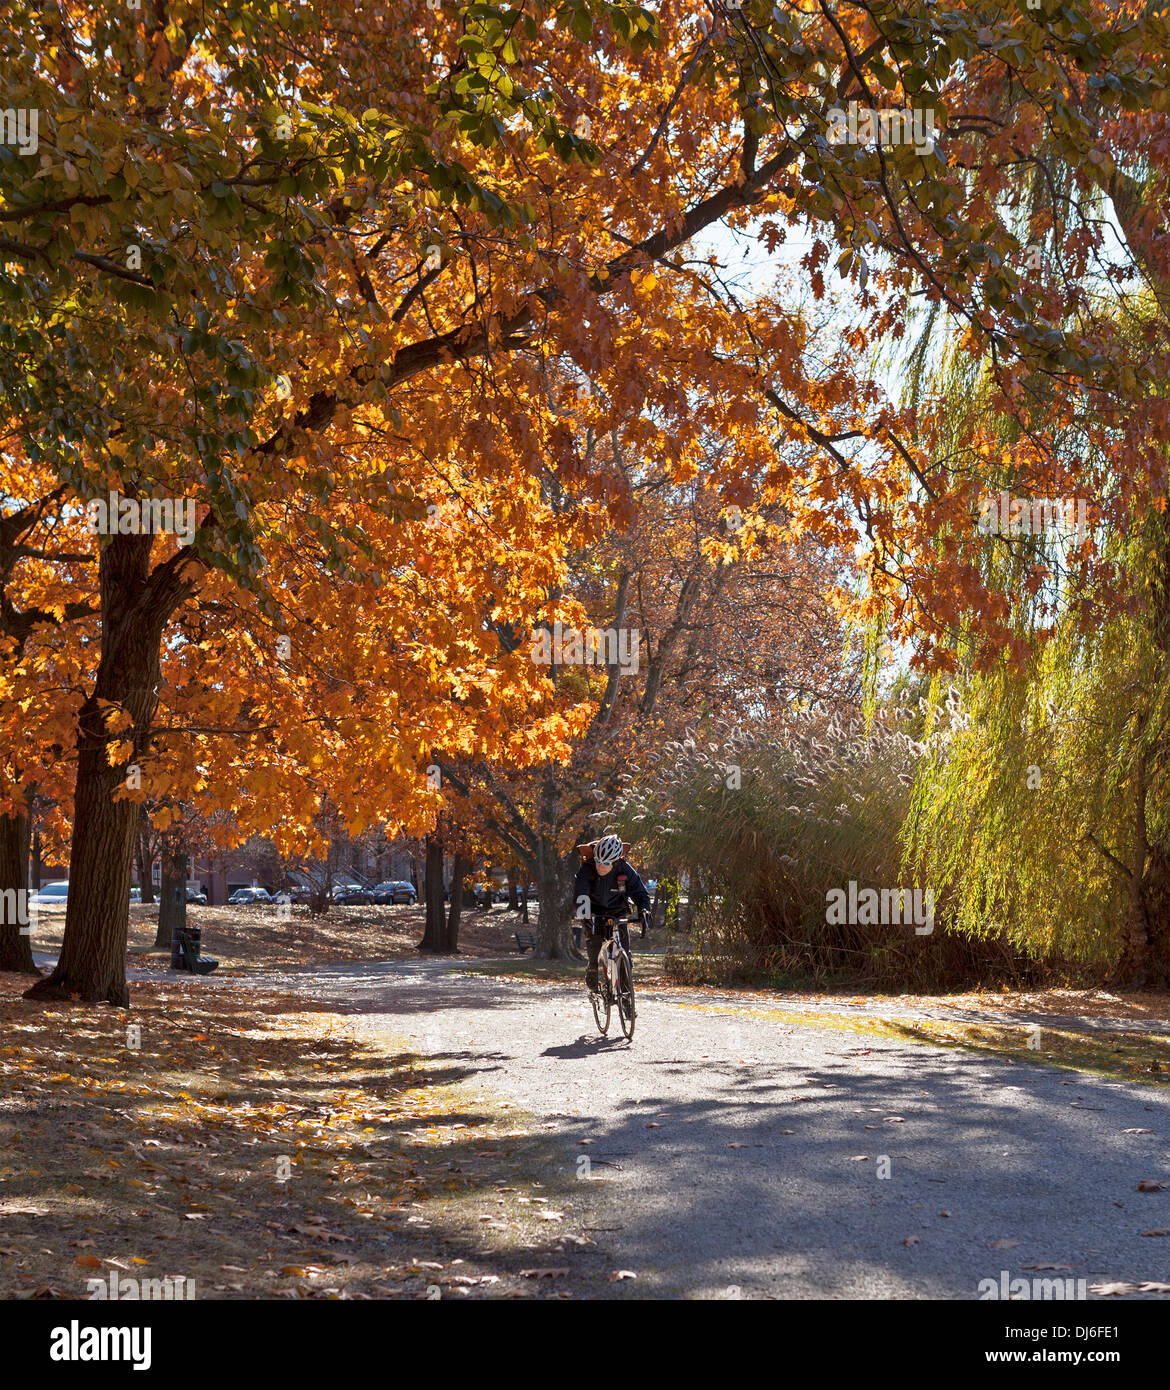 A bicyclist rides through a park filled with colorful trees in Boston. Stock Photo